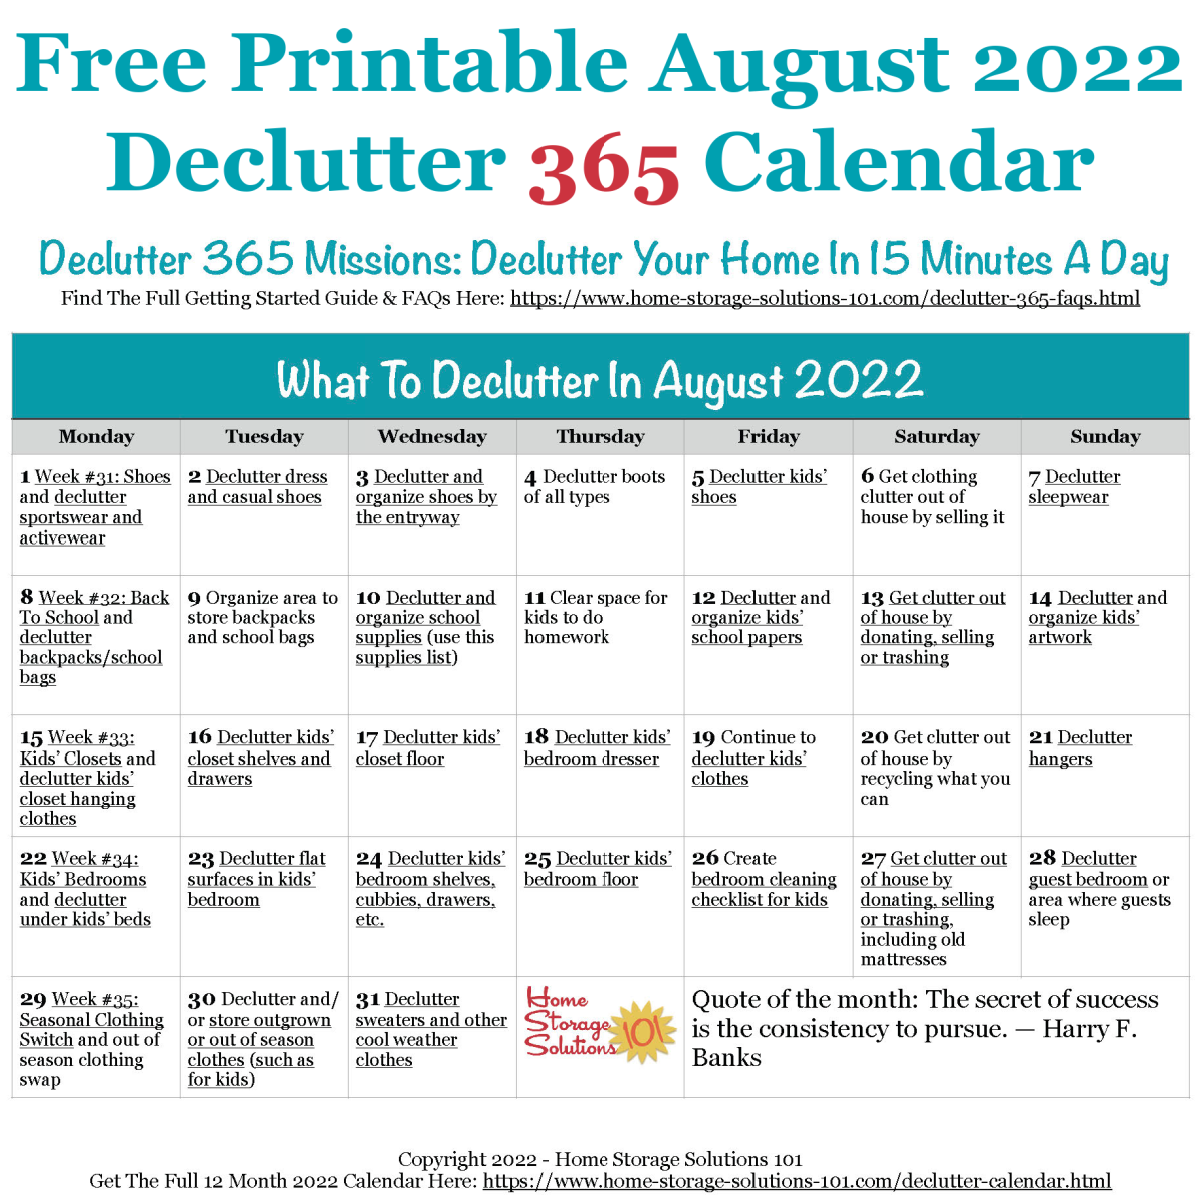 Free printable August 2022 decluttering calendar with daily 15 minute missions. Follow the entire Declutter 365 plan provided by Home Storage Solutions 101 to declutter your whole house in a year. #Declutter365 #Decluttering #Declutter